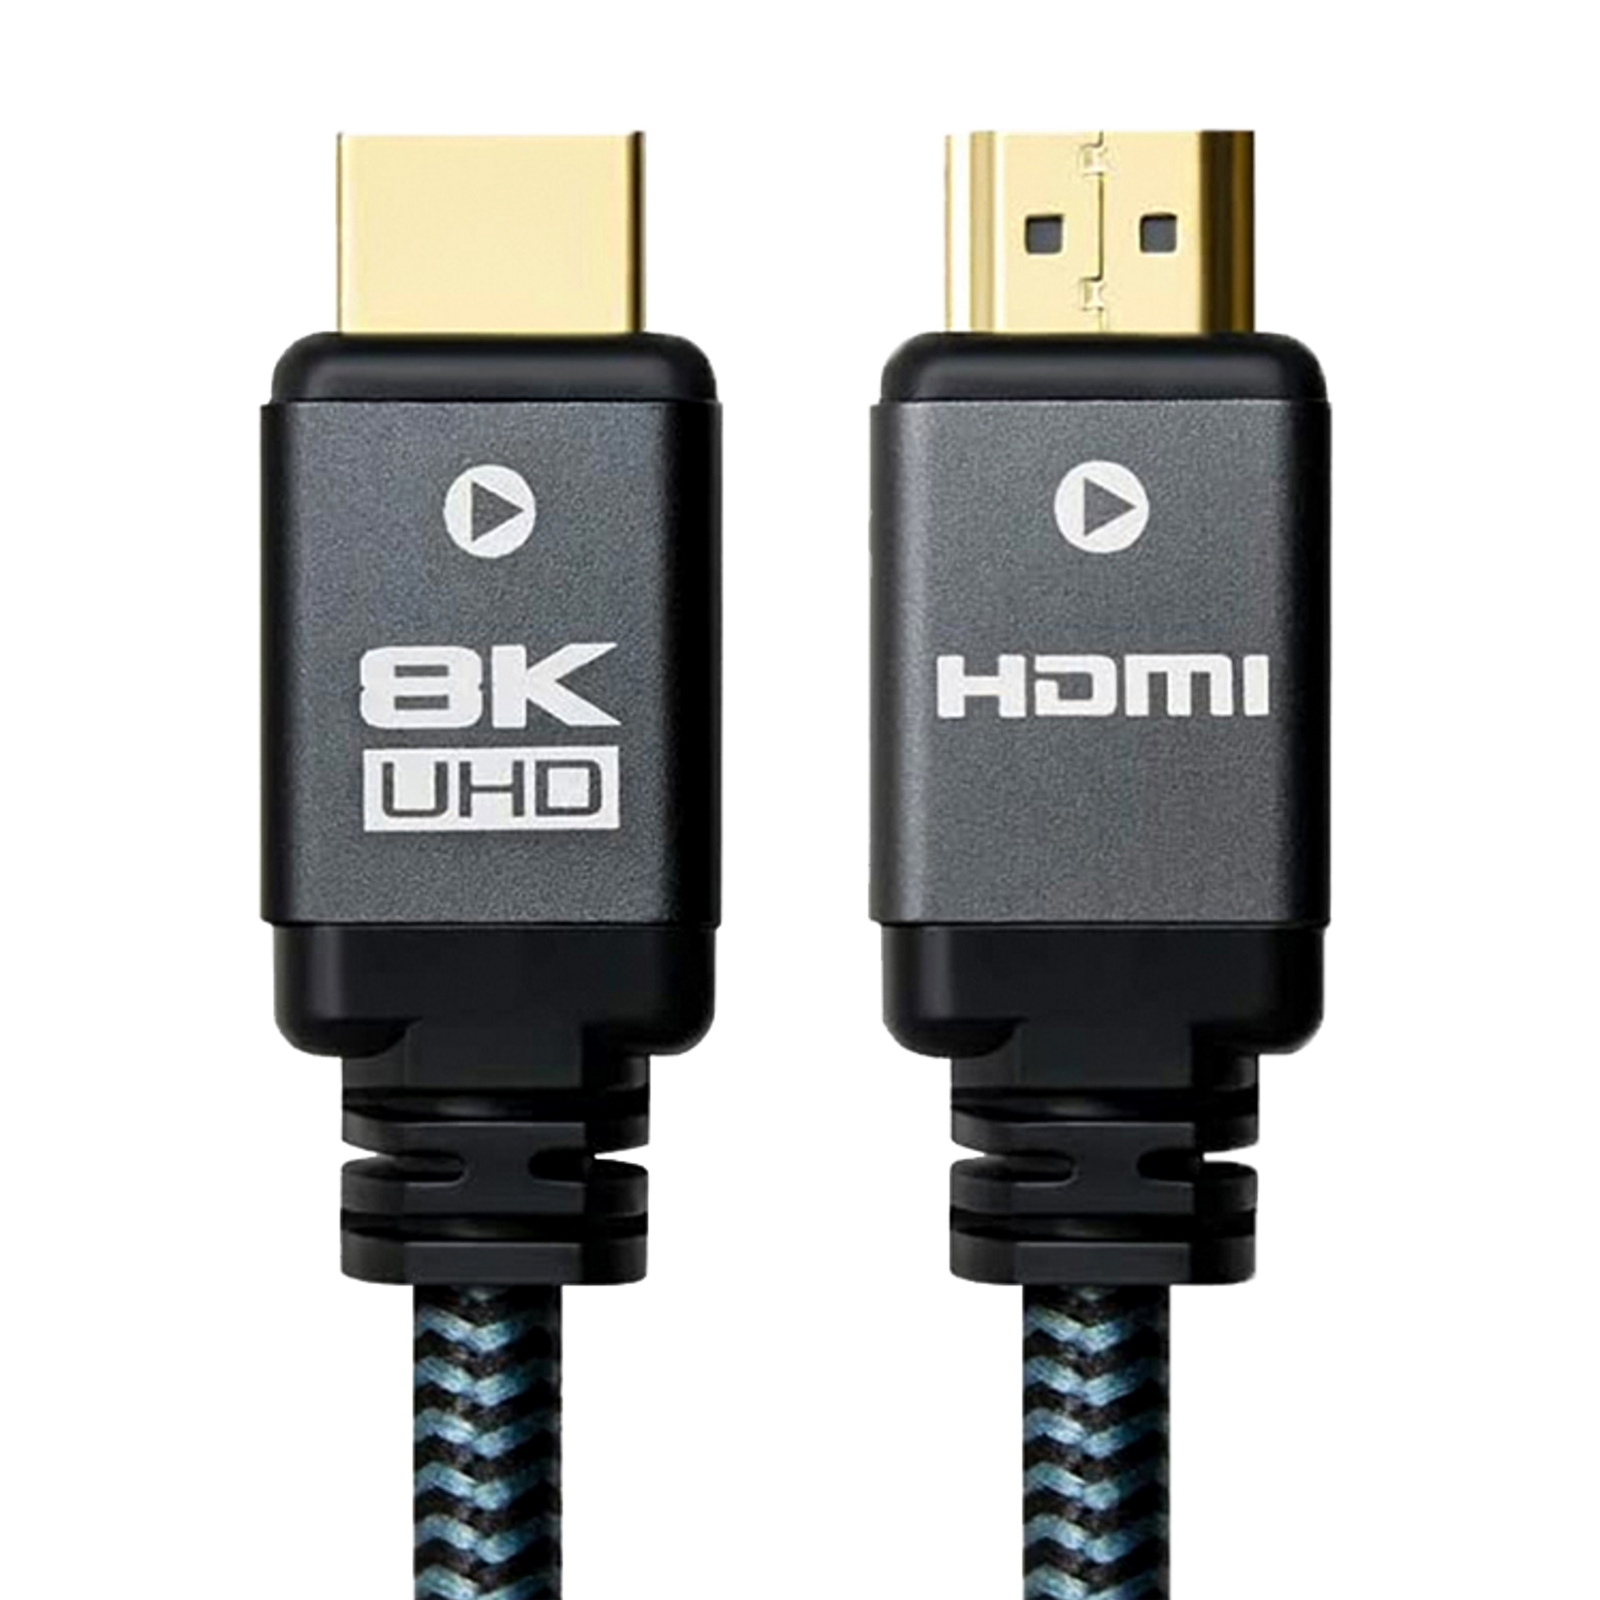 Prevo HDMI-2.1-2M HDMI Cable, HDMI 2.1 (M) to HDMI 2.1 (M), 2m, Black & Grey, Supports Displays up to 8K@60Hz, 99.9% Oxygen-Free Copper with Gold-Plated Connectors, Superior Design & Performance, Retail Box Packaging